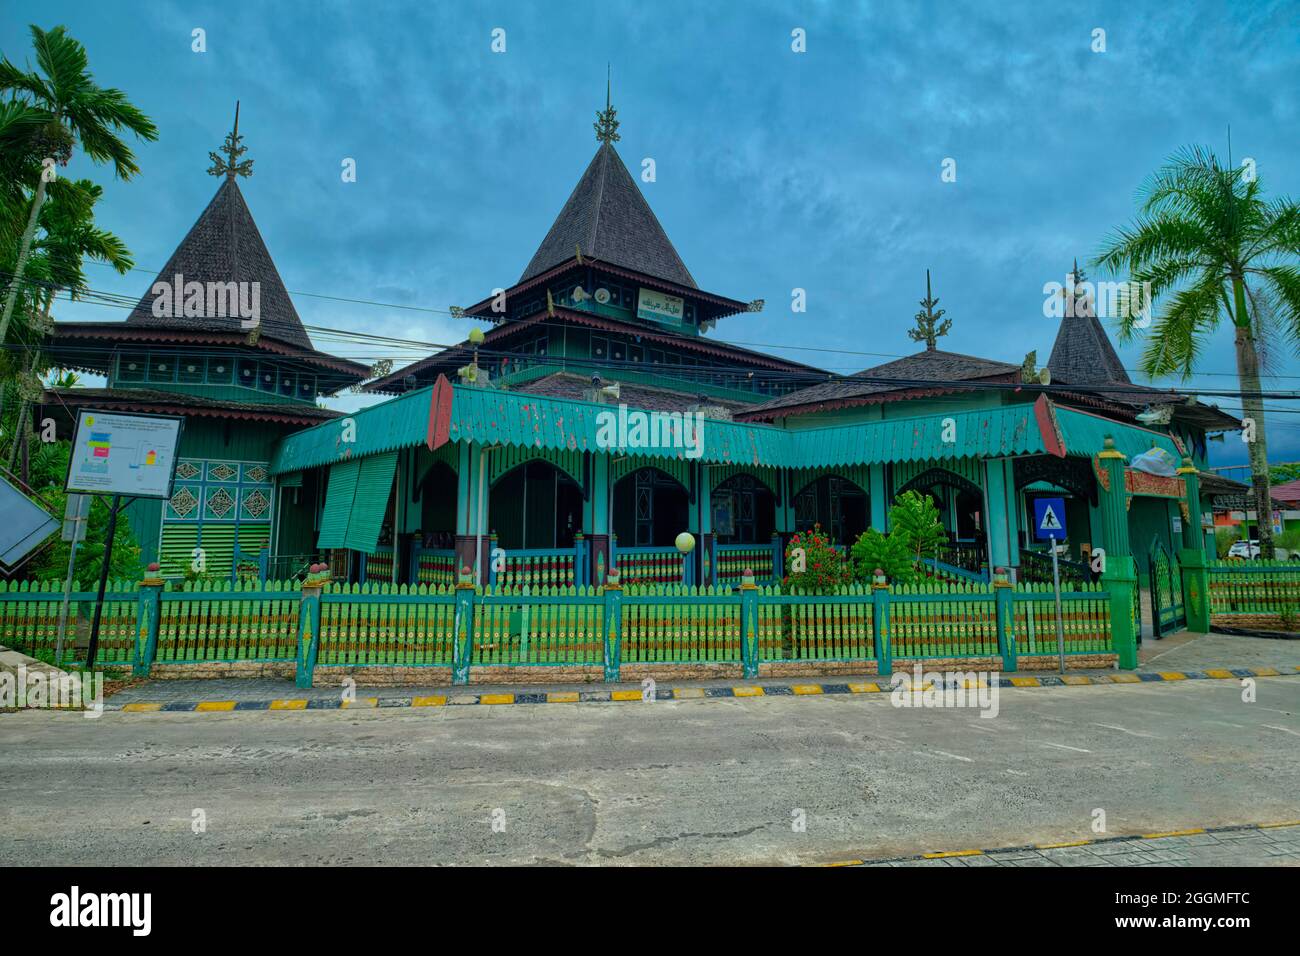 Masjid Sultan Suriansyah is the oldest mosque in South Kalimantan. Built about 300 years ago during the reign of Tuan Guru (1526-1550), the first Banj Stock Photo